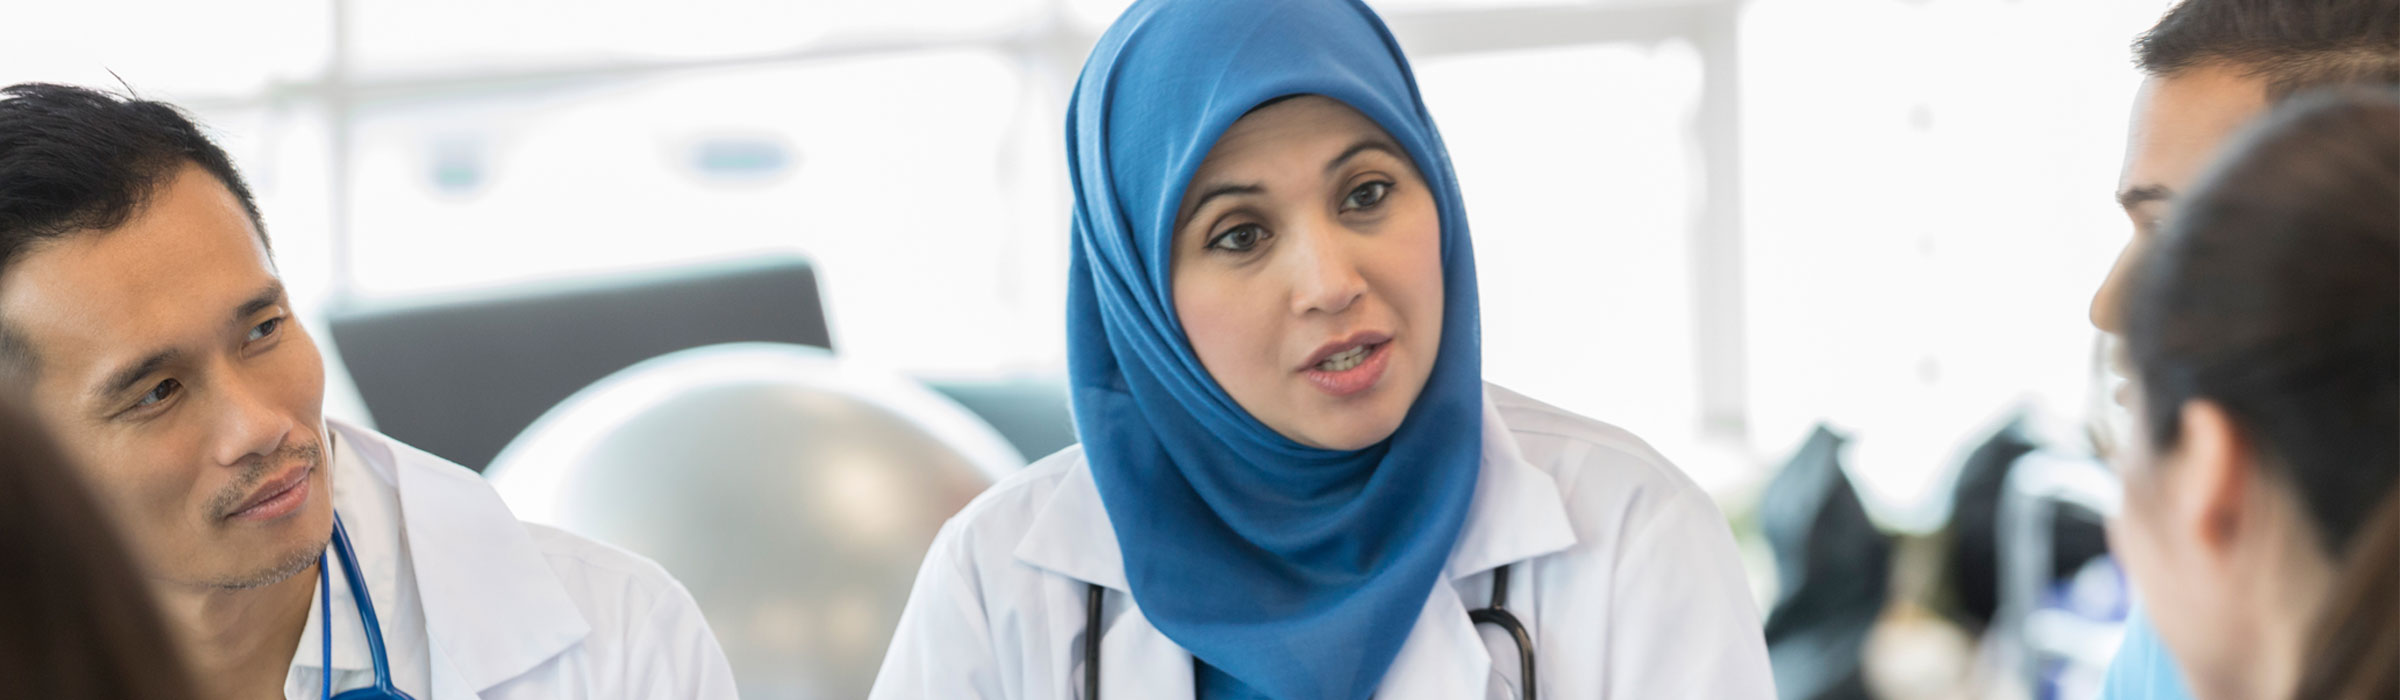 Female doctor wearing a hijab talking to other doctors. 